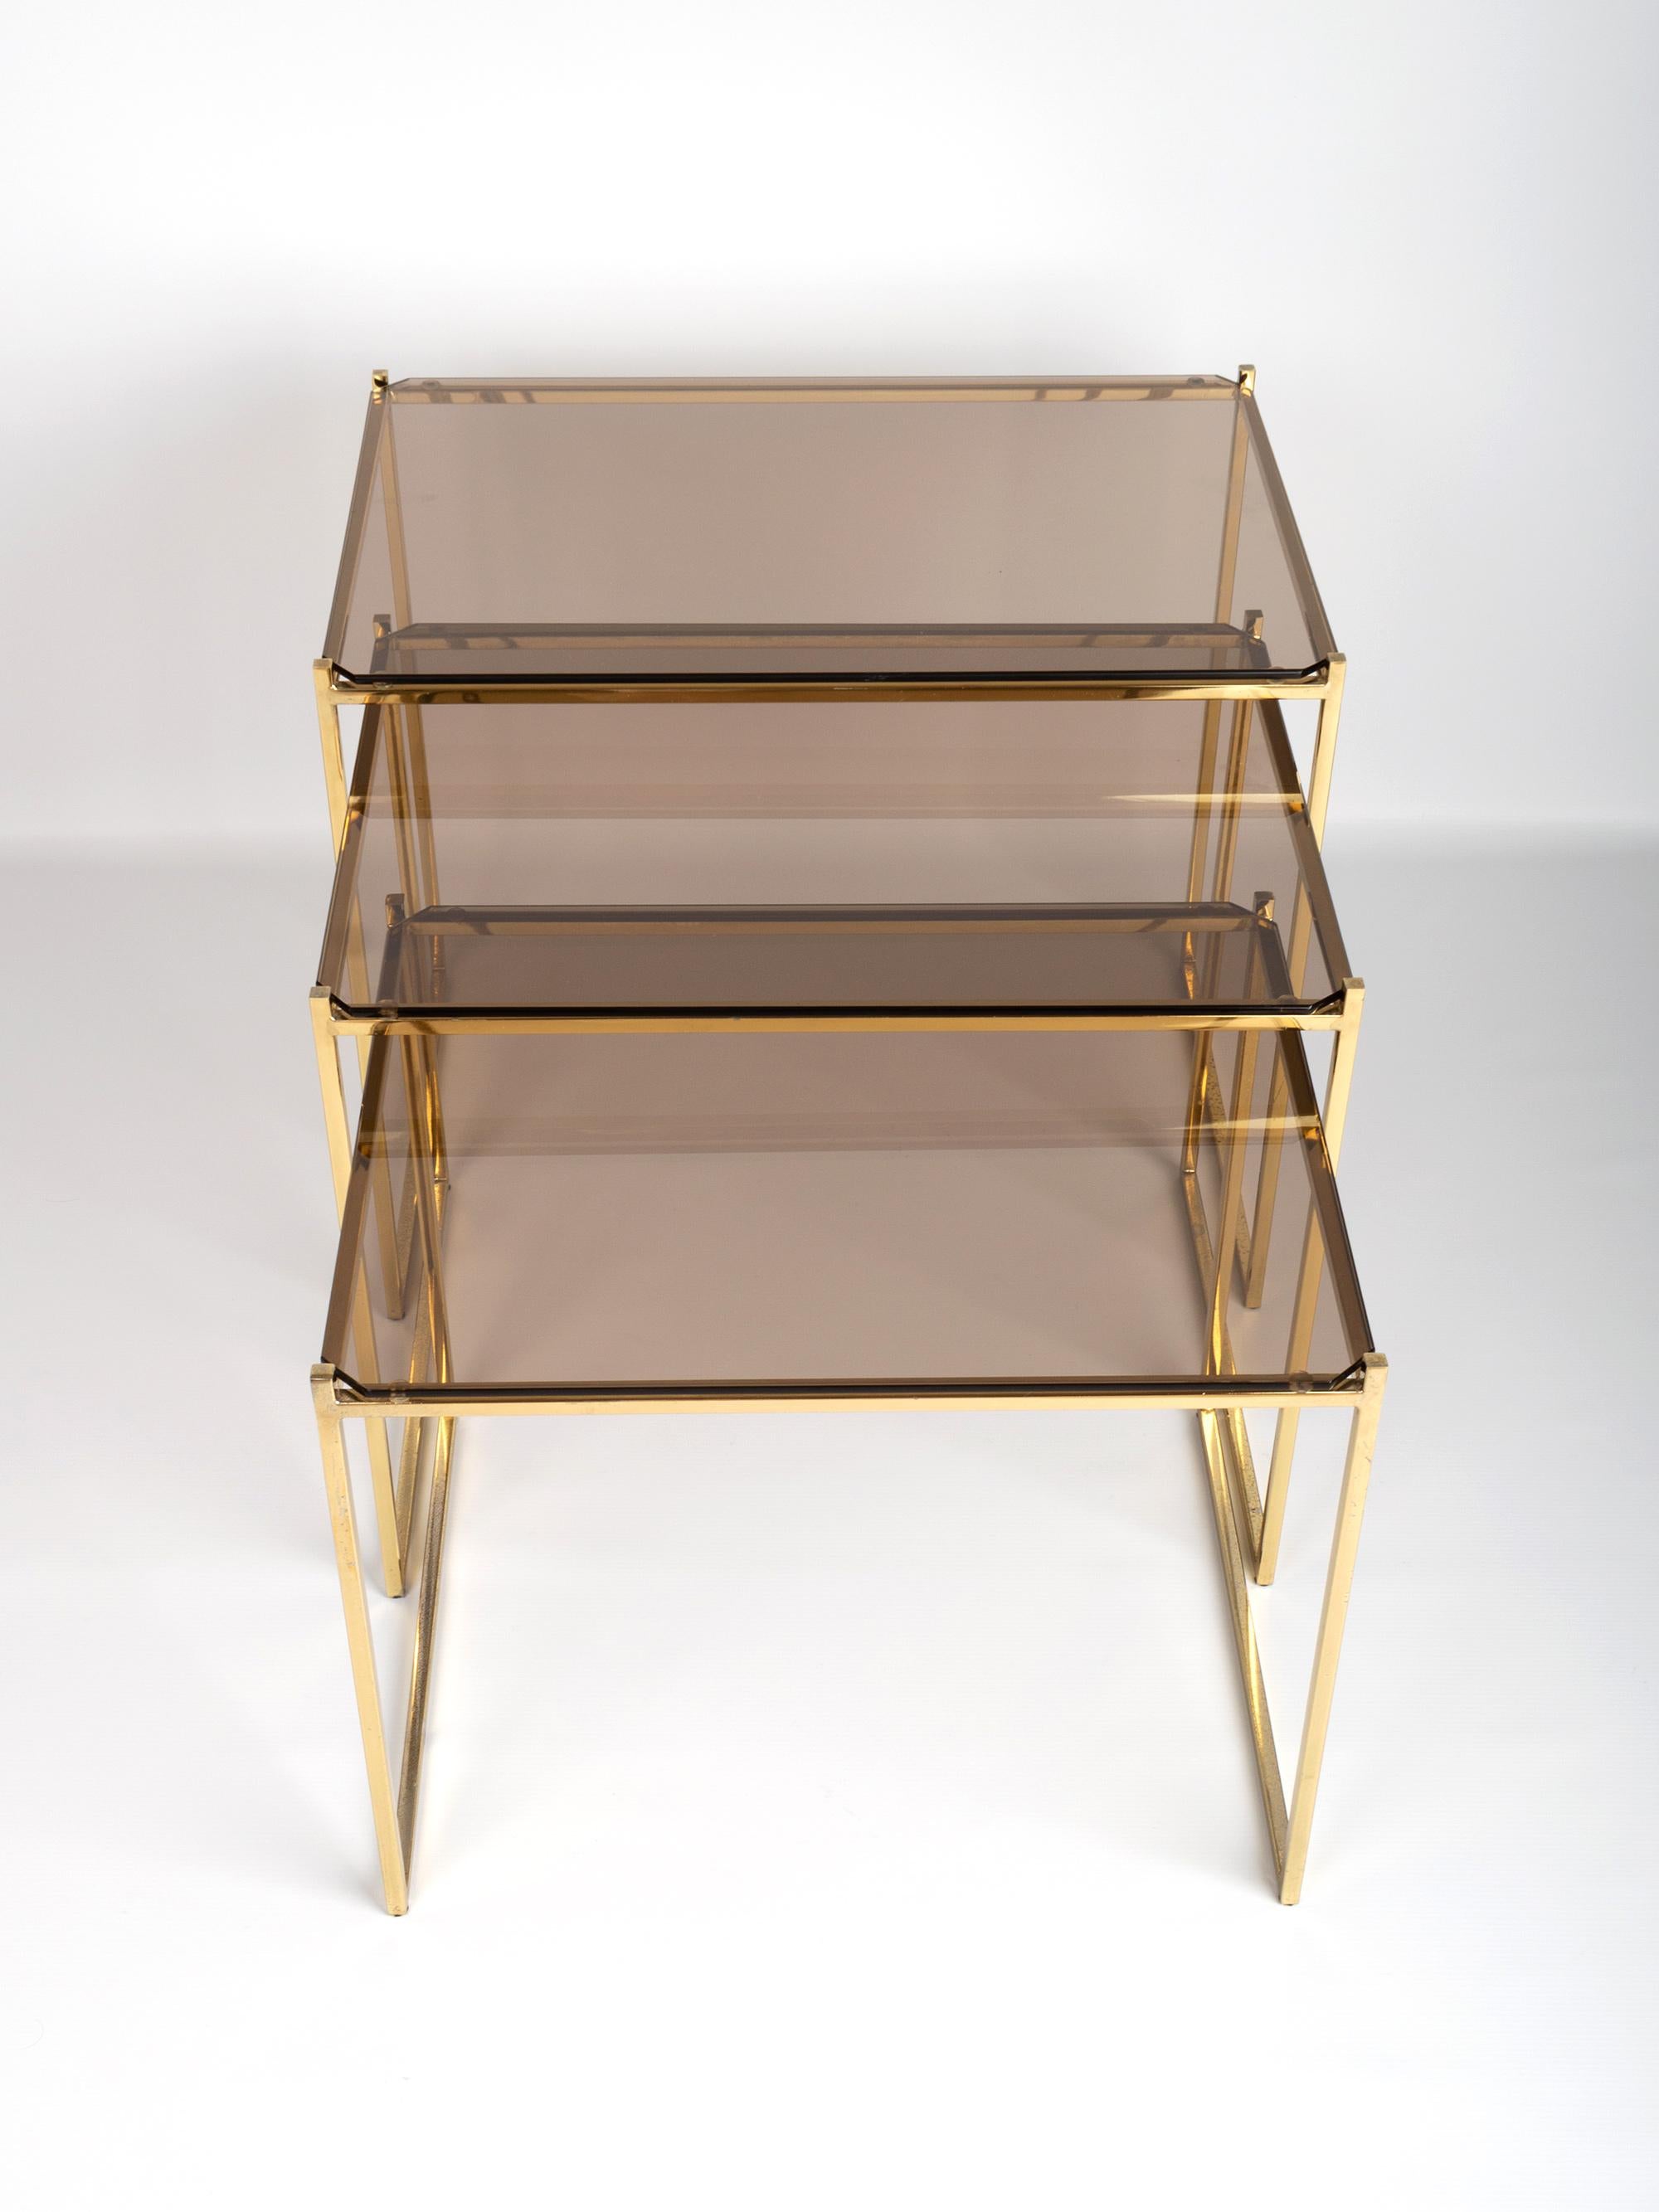 Late 20th Century Mid-Century Modern Gold-Plated Nesting Side Tables